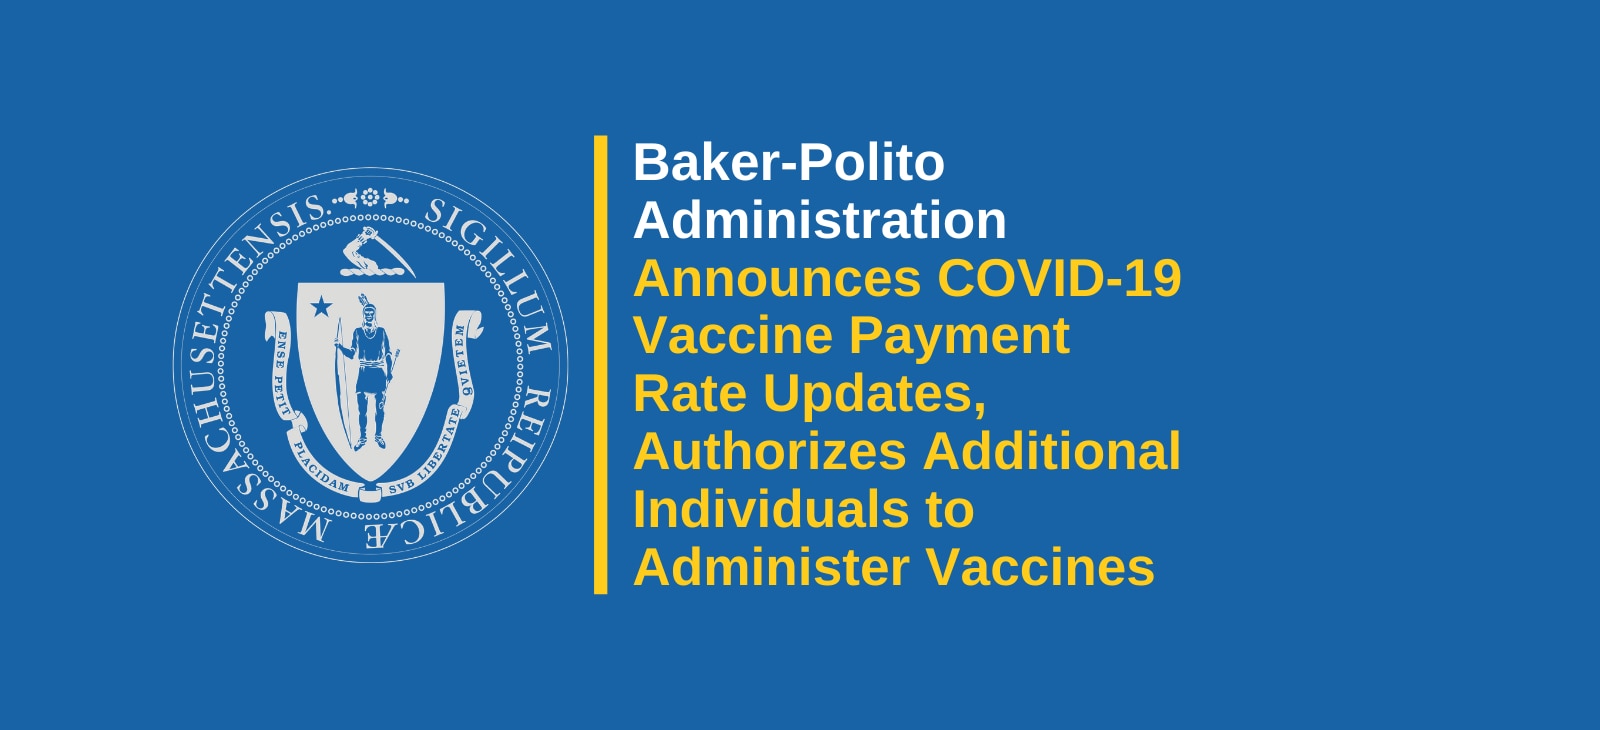 Baker-Polito Administration Announces COVID-19 Vaccine Payment Rate Updates, Authorizing of Additional Individuals to Administer COVID-19 Vaccinations